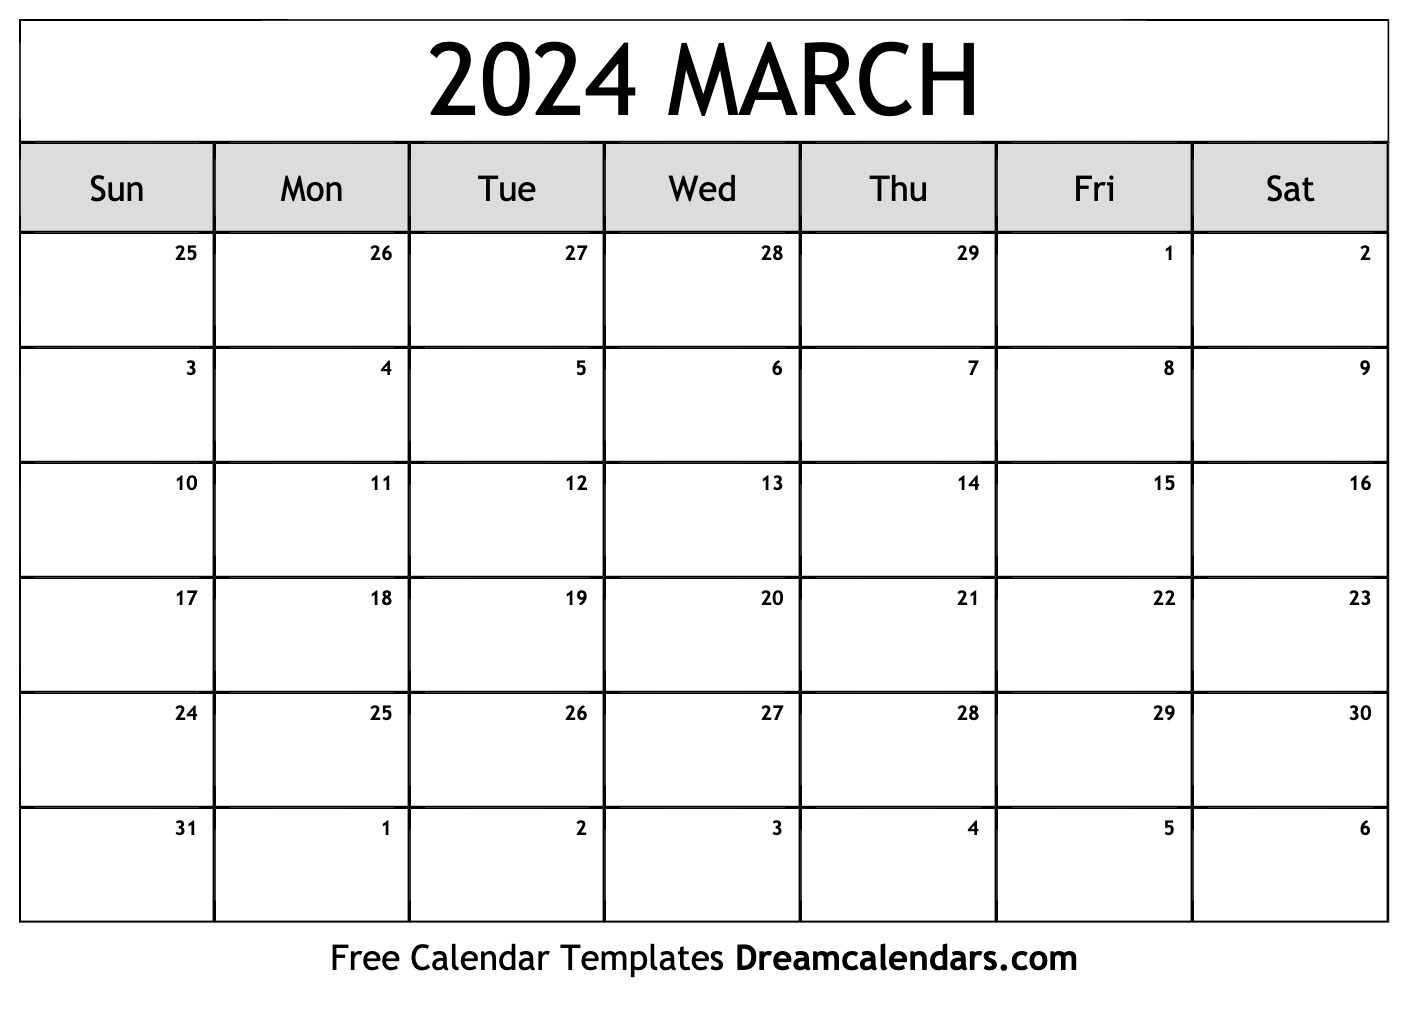 March 2024 Calendar | Free Blank Printable With Holidays for Blank Calendar Template March 2024 Printable